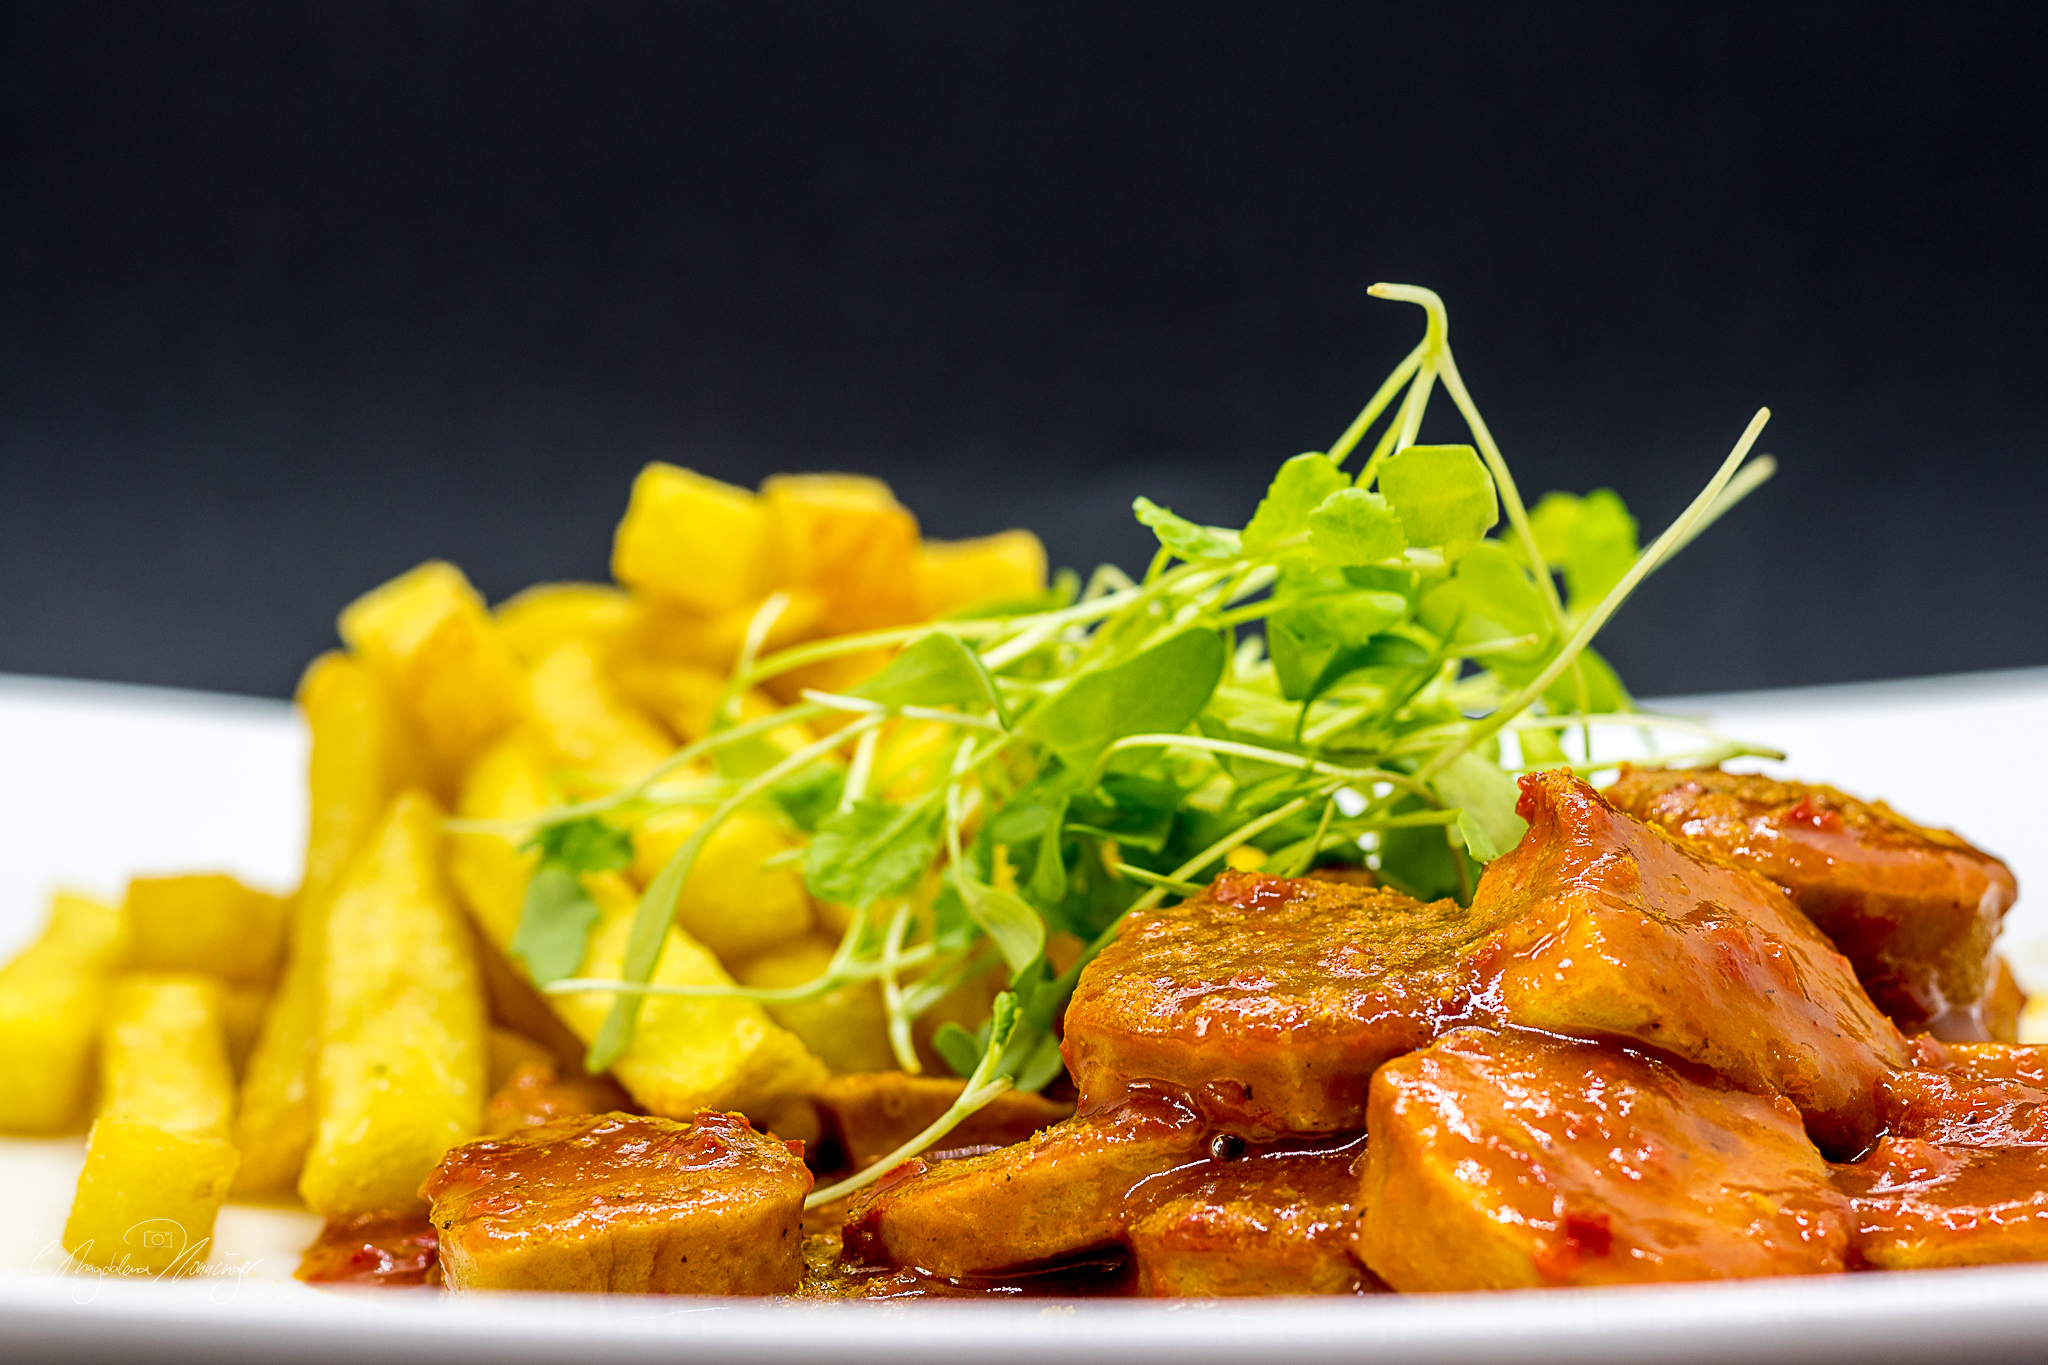 Featured image for “Currywurst in hausgemachter Soße”